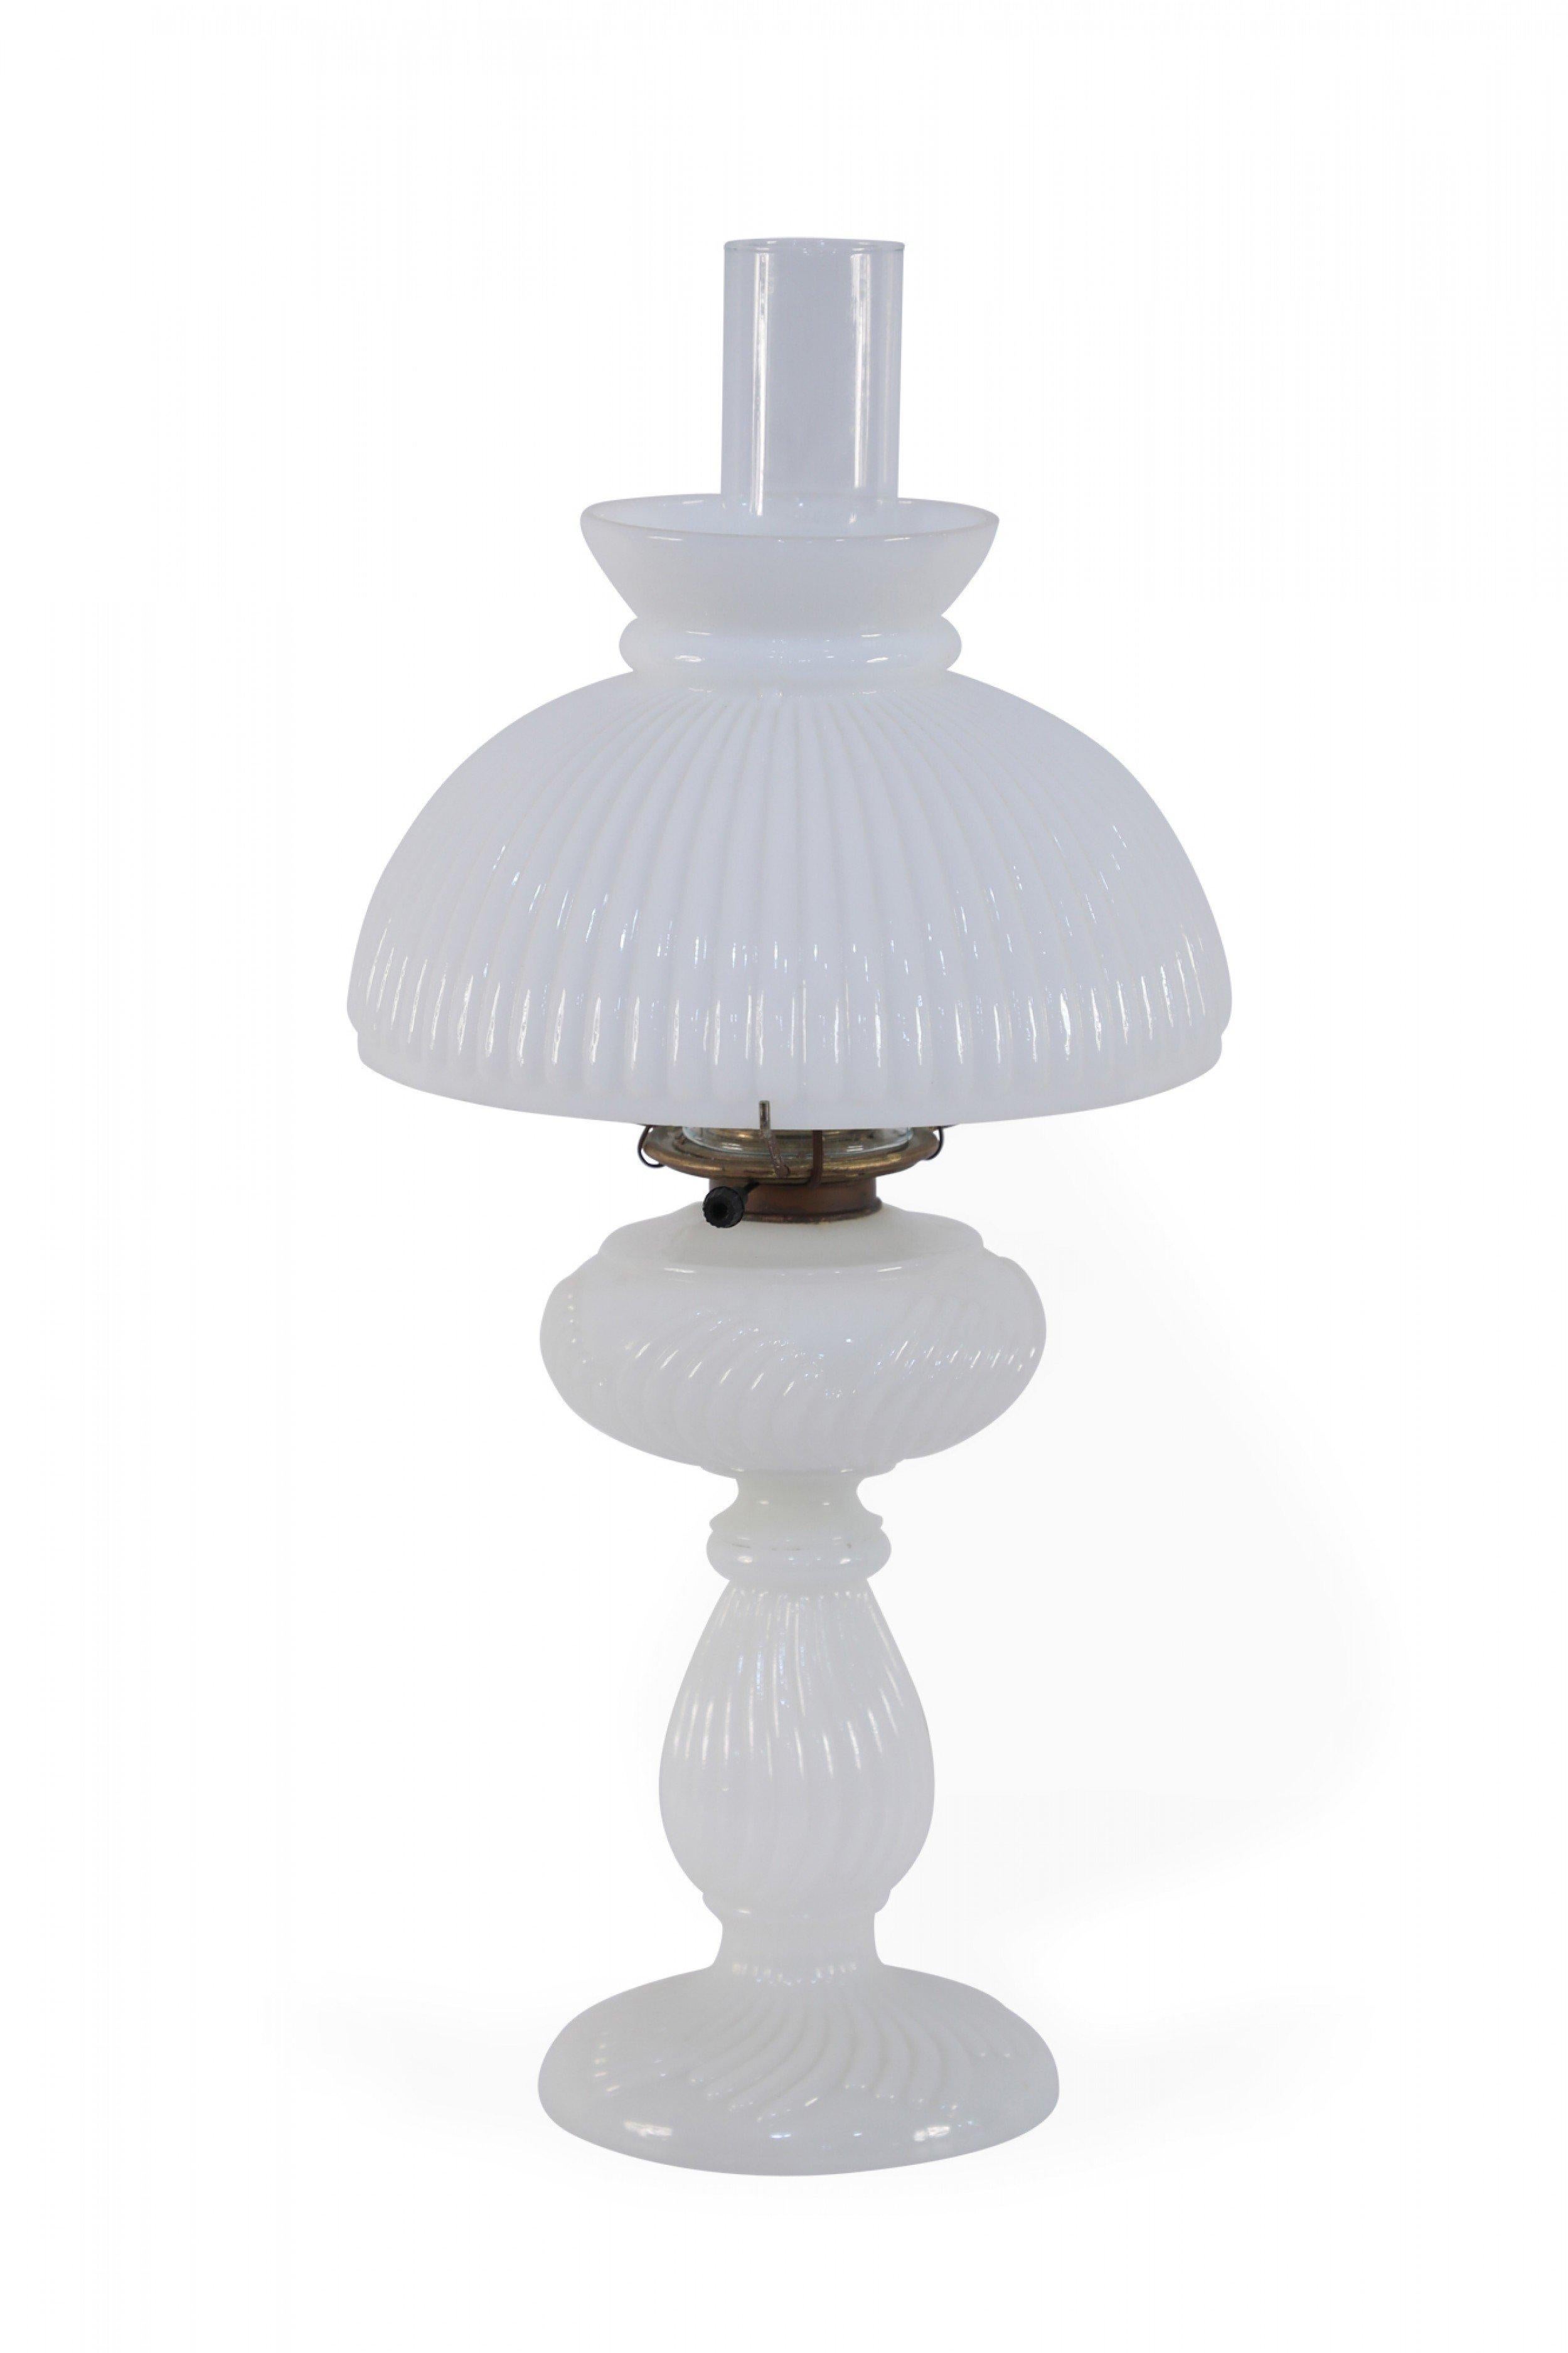 American Victorian ribbed milk glass (oil) table lamp comprised of a shaped glass base with threaded brass hardware and a clear glass hurricane shade beneath a larger ribbed milk glass shade.